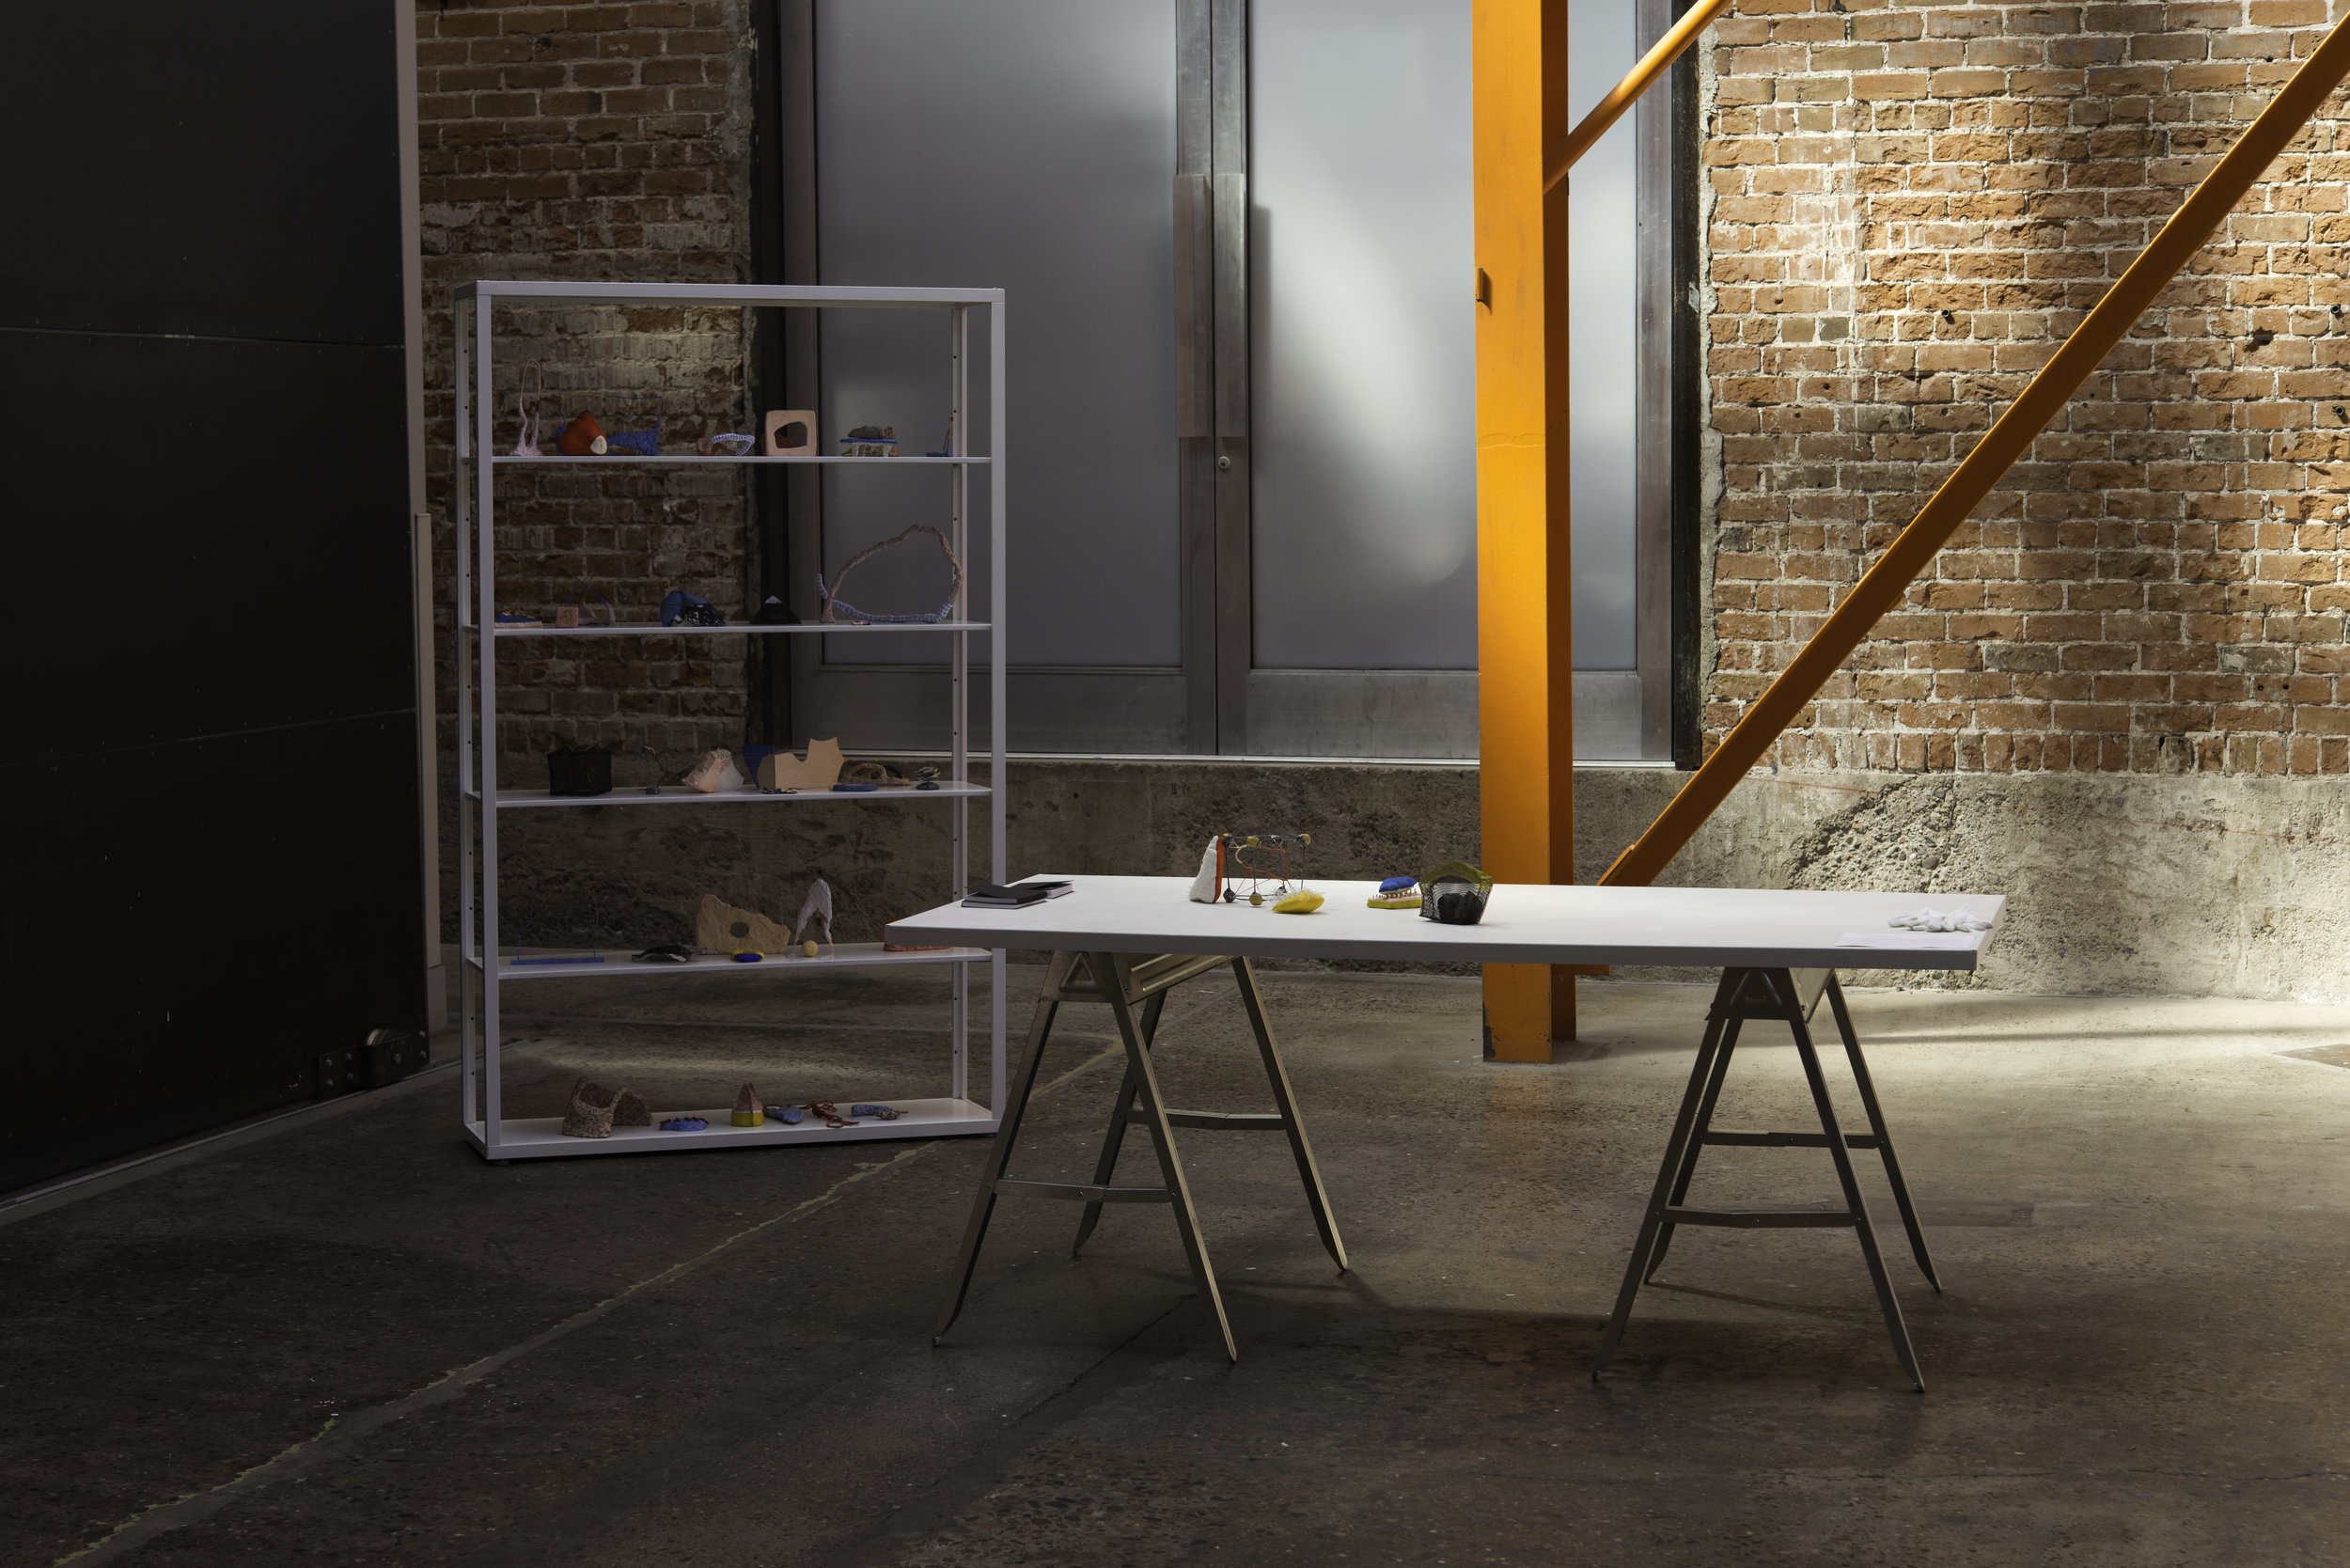   Like a Rock  (Installation and Interactive view), 2019  Dimensions variable  41 Interactive mixed media objects and three accompanying books, table, gloves, shelving unit, From MFA Thesis exhibition,  Like a ______   Image Credit: Ryan Parra 